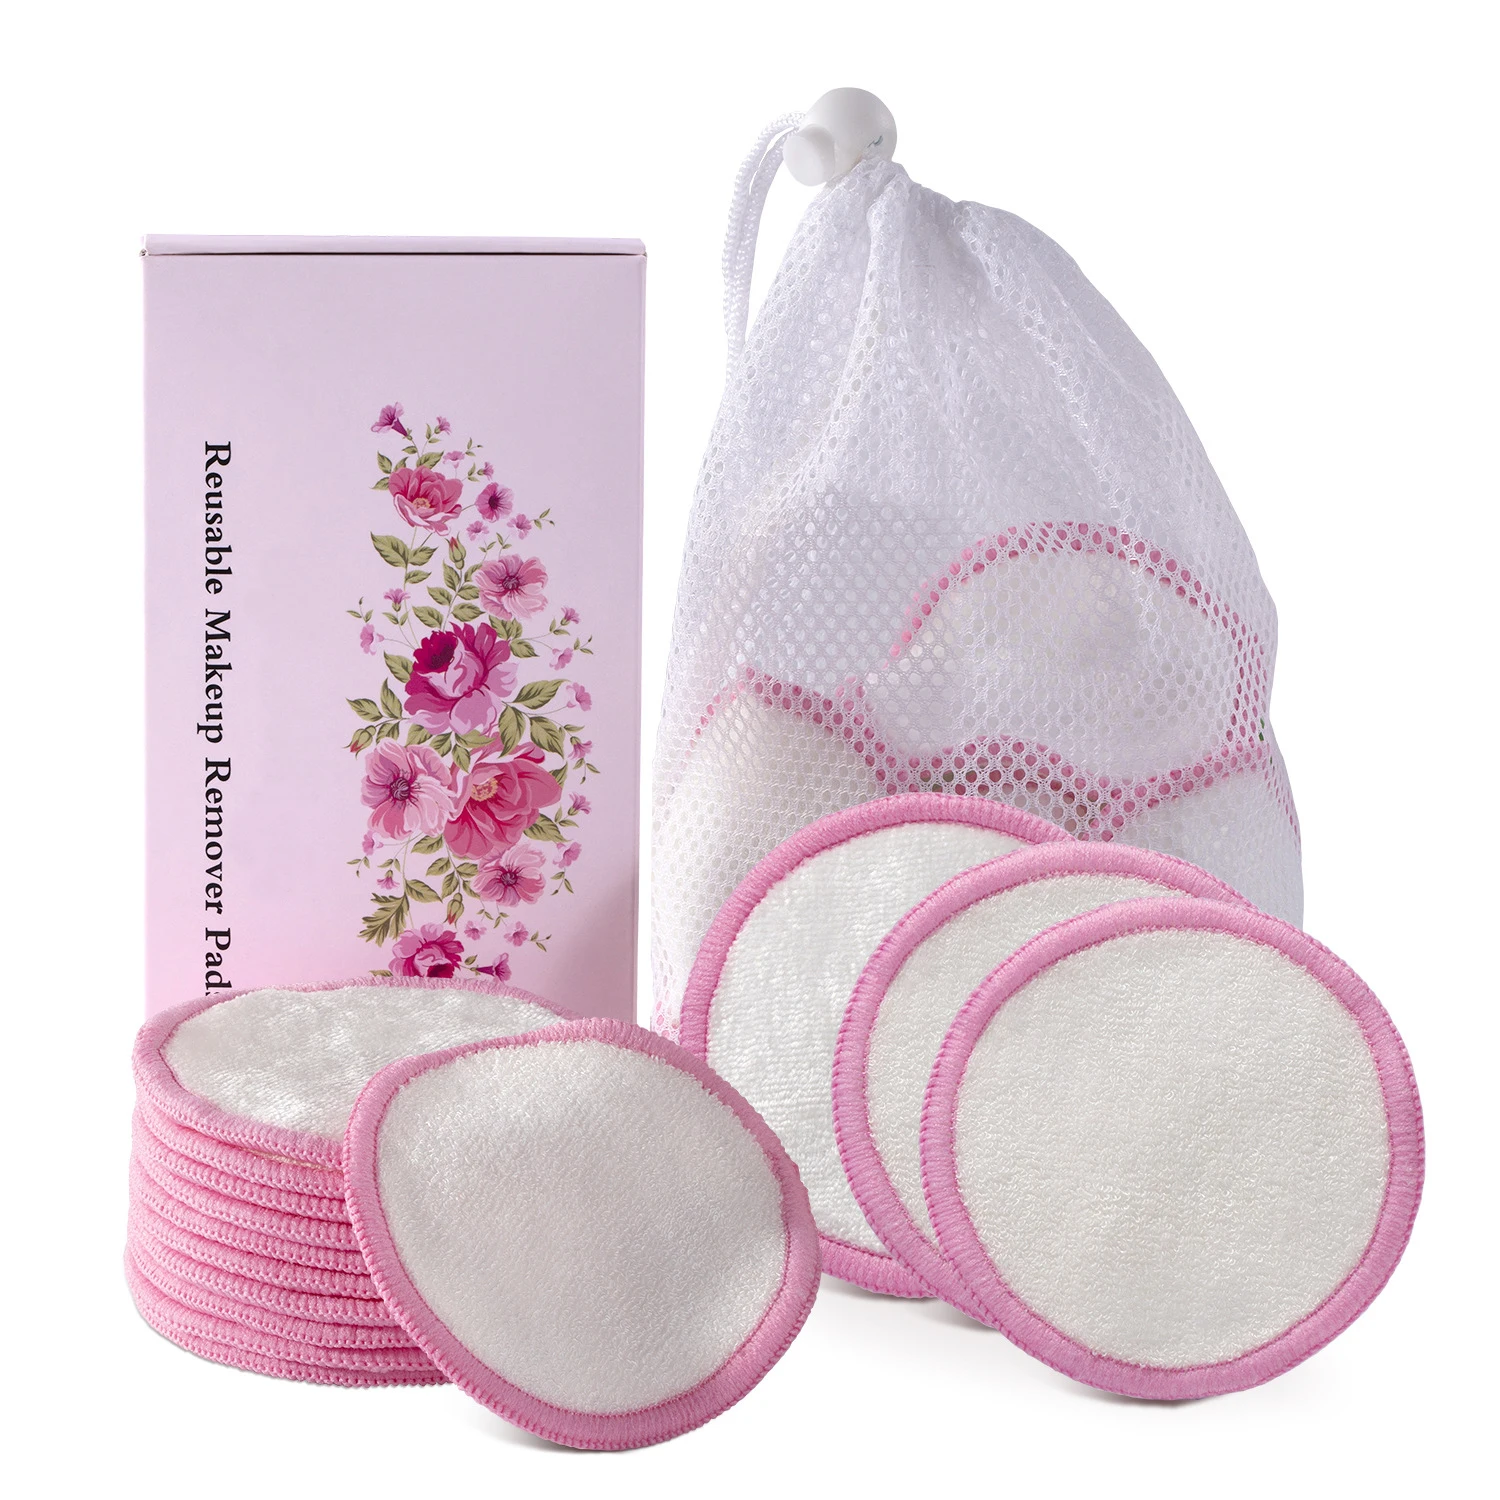 

In Stock New Amazon Hot Sell Bamboo Beauty With Velvet Makeup remover pads, White/blue/yellow/pink, customize color is available